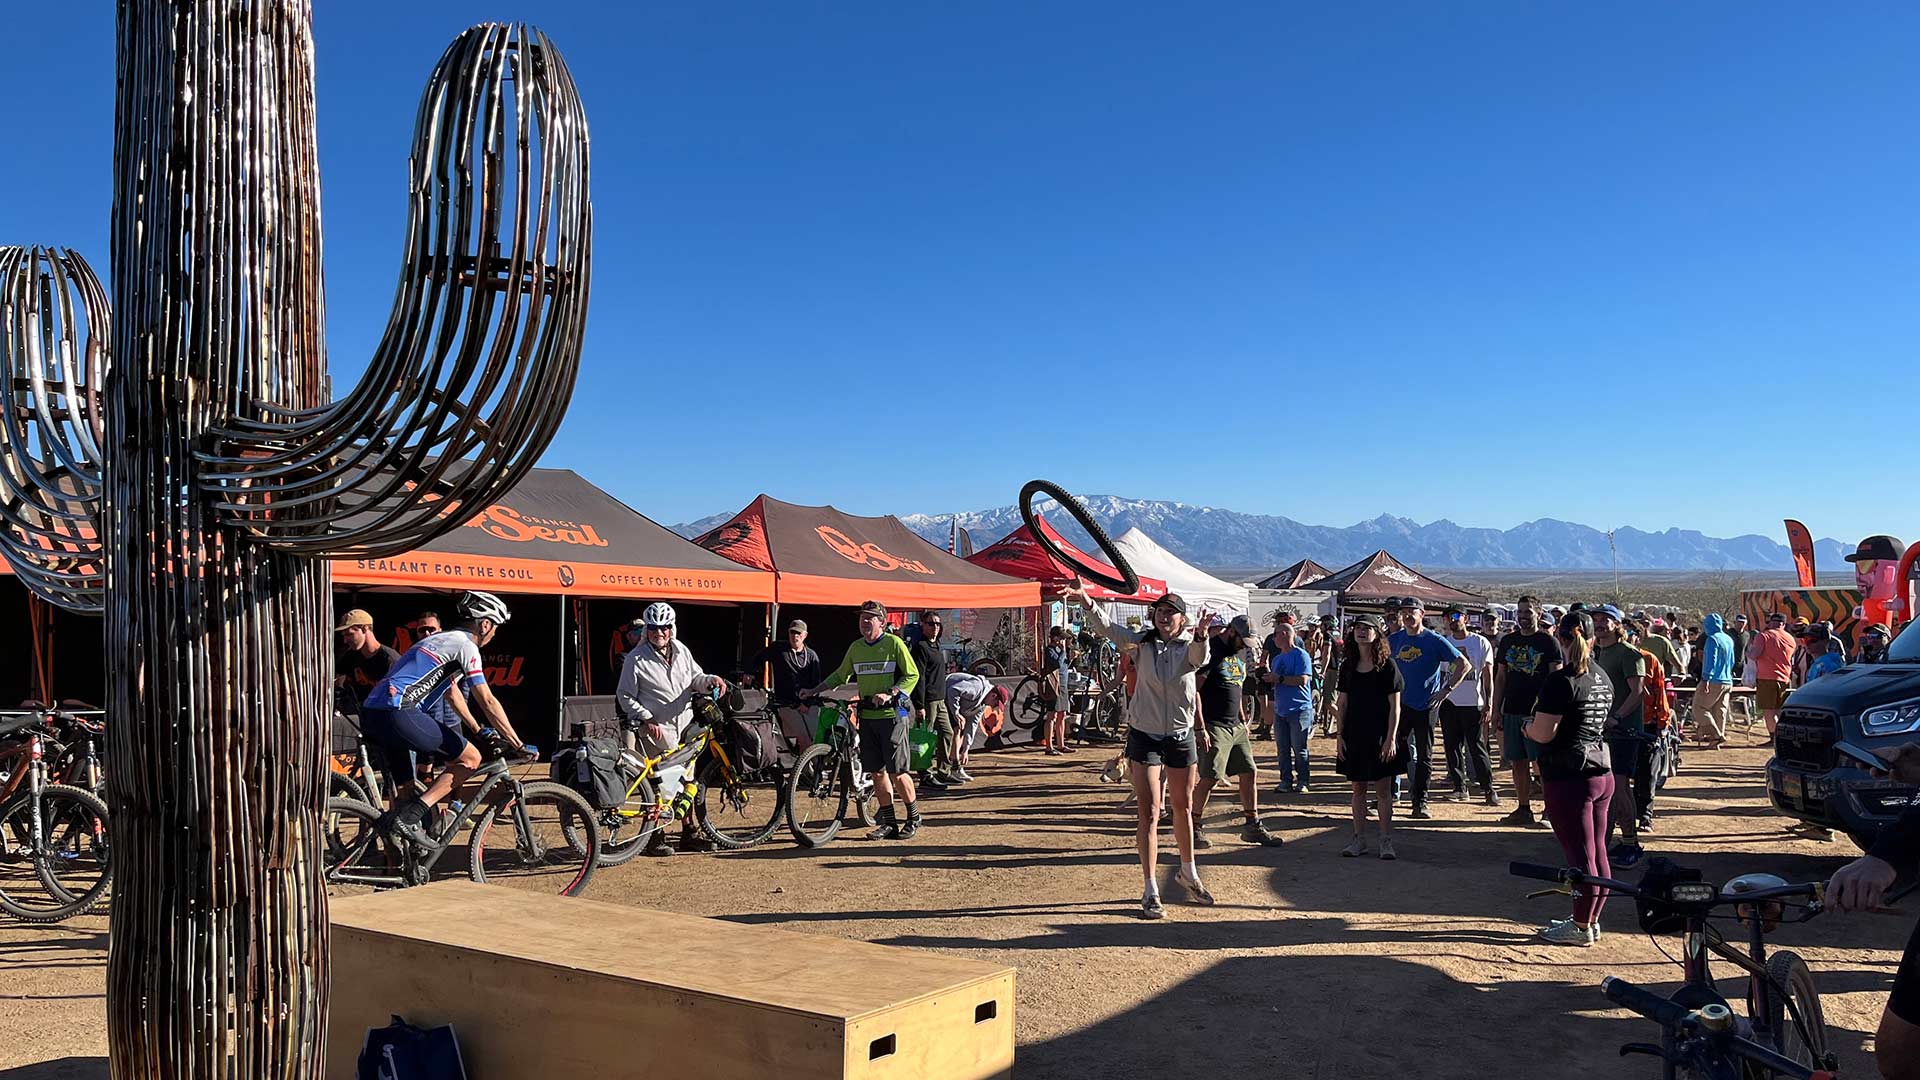 People line up to try and land an old tire on the BICAS cactus.